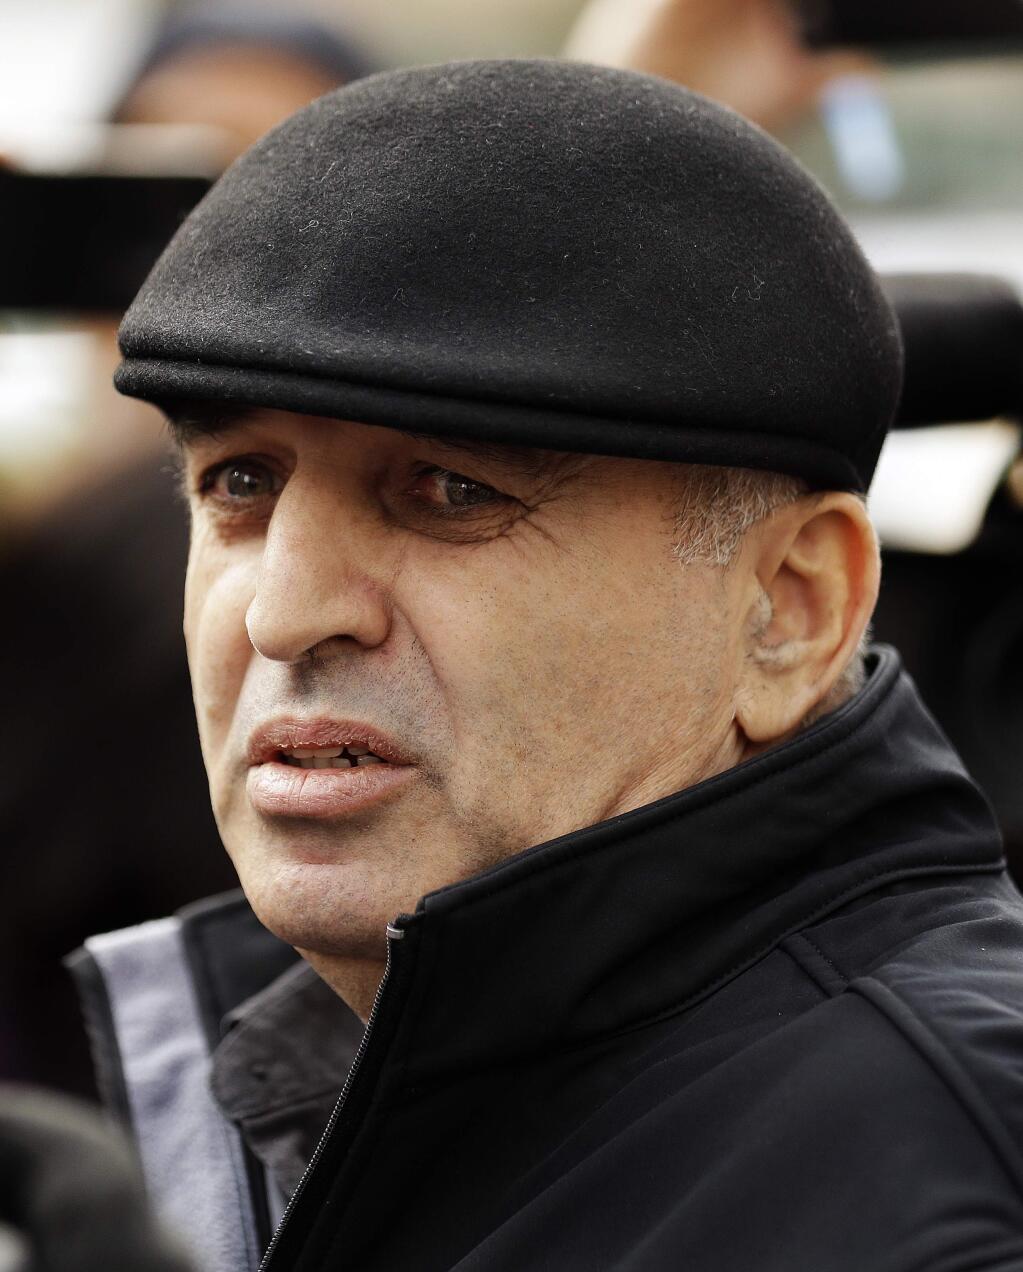 Al Salman, uncle of Noor Salman, speaks to the media Tuesday, Jan. 17, 2017, outside a federal courthouse in Oakland, Calif. The widow of the Orlando nightclub gunman has been charged with helping her husband in the months leading up to the June massacre that left 49 people dead, according to an indictment unsealed Tuesday. (AP Photo/Ben Margot)